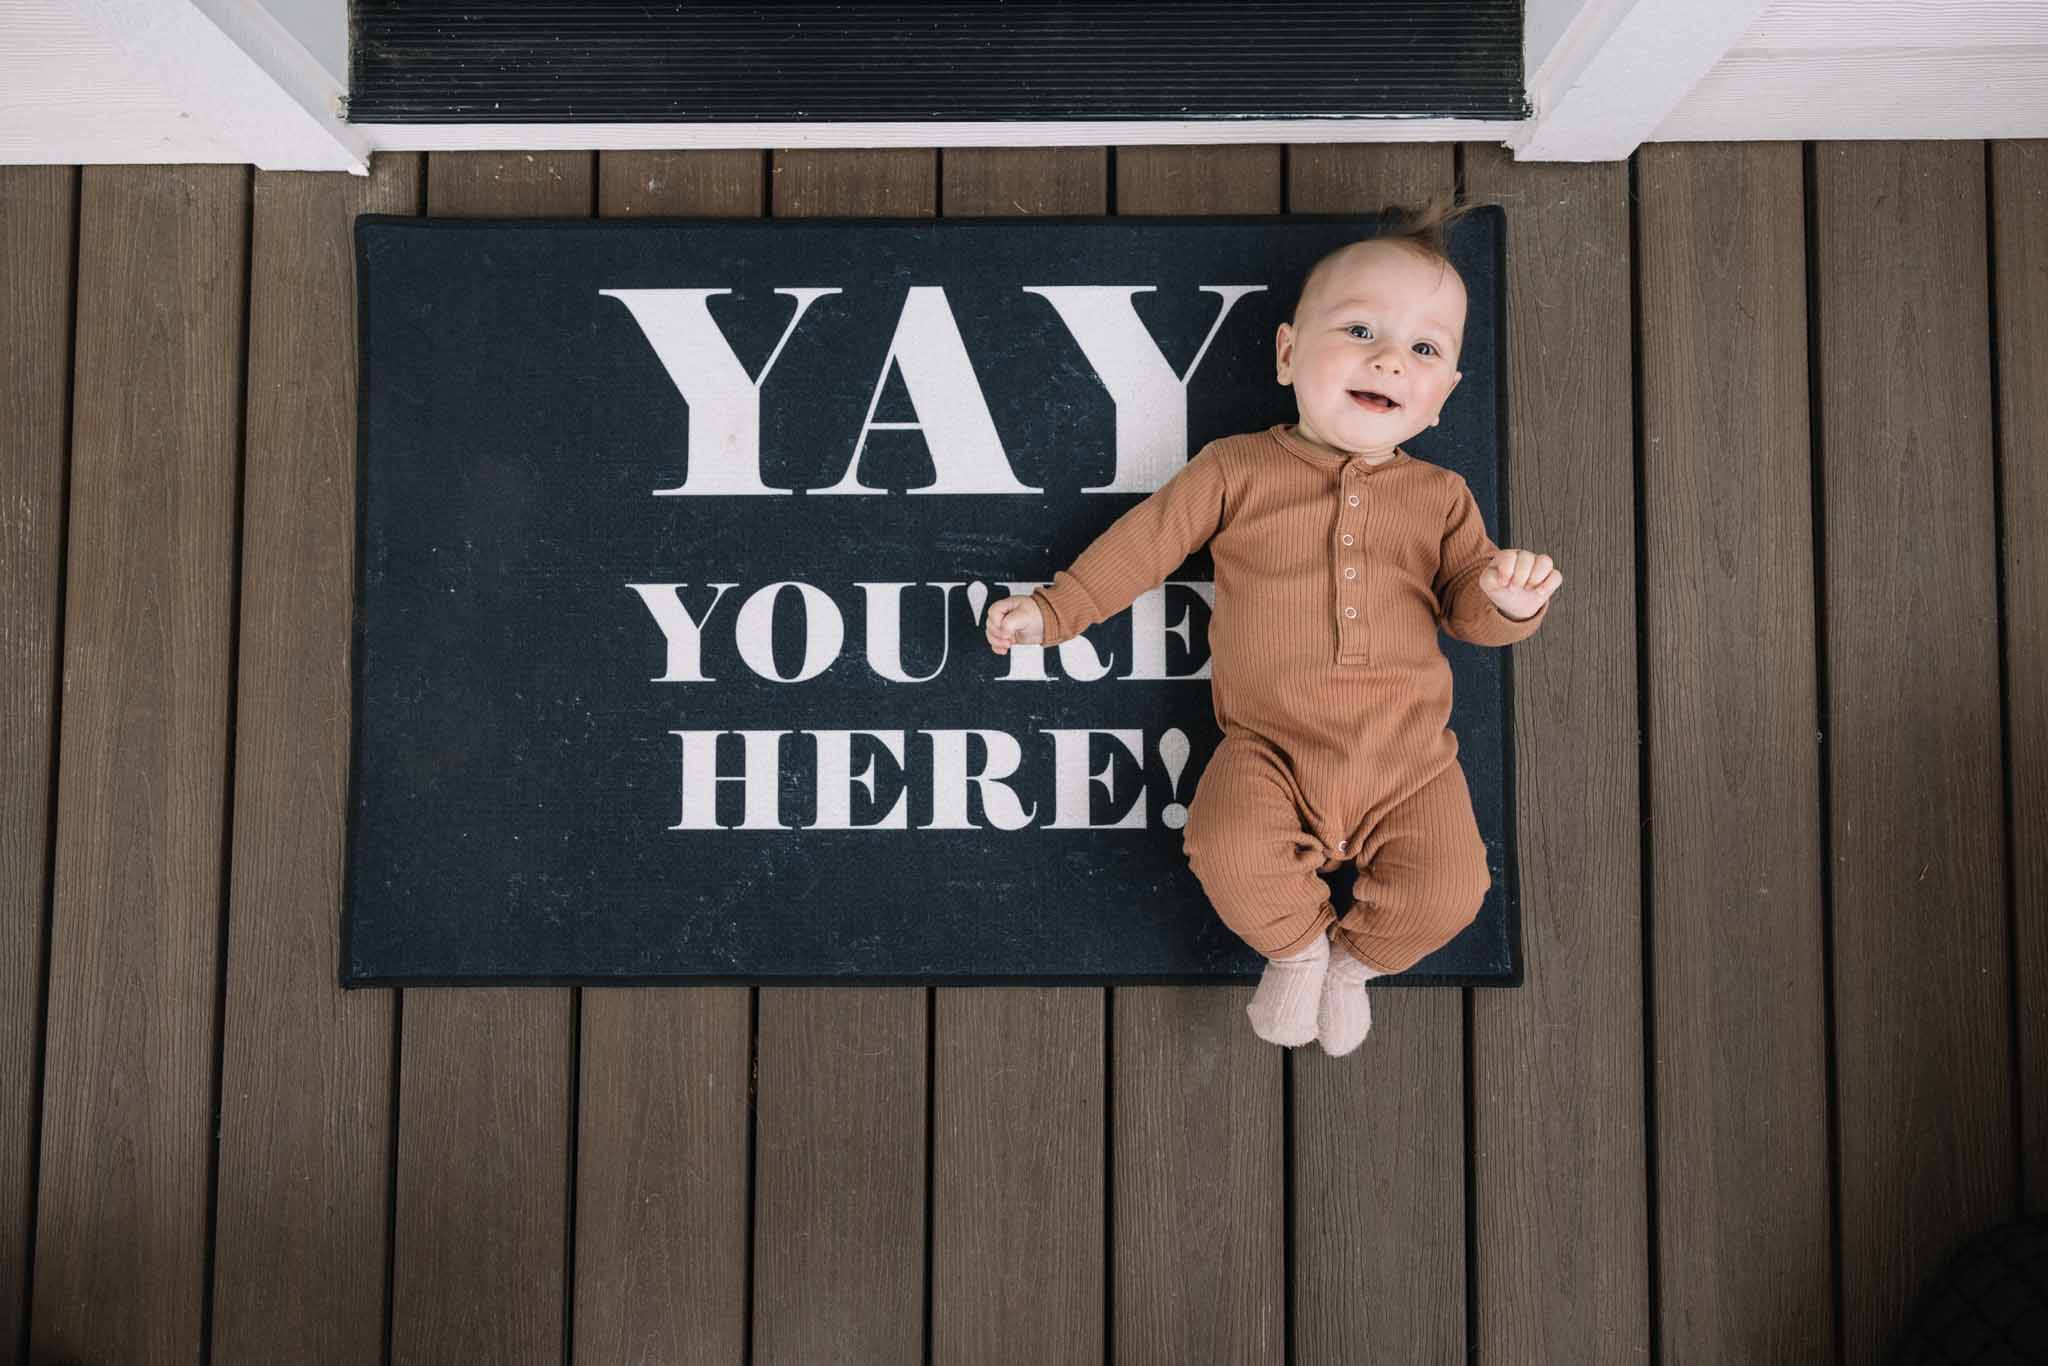 I love that Shutterfly allows you to customize its doormats. I chose the Text Gallery doormat & customized it to say "Yay You're Here!"